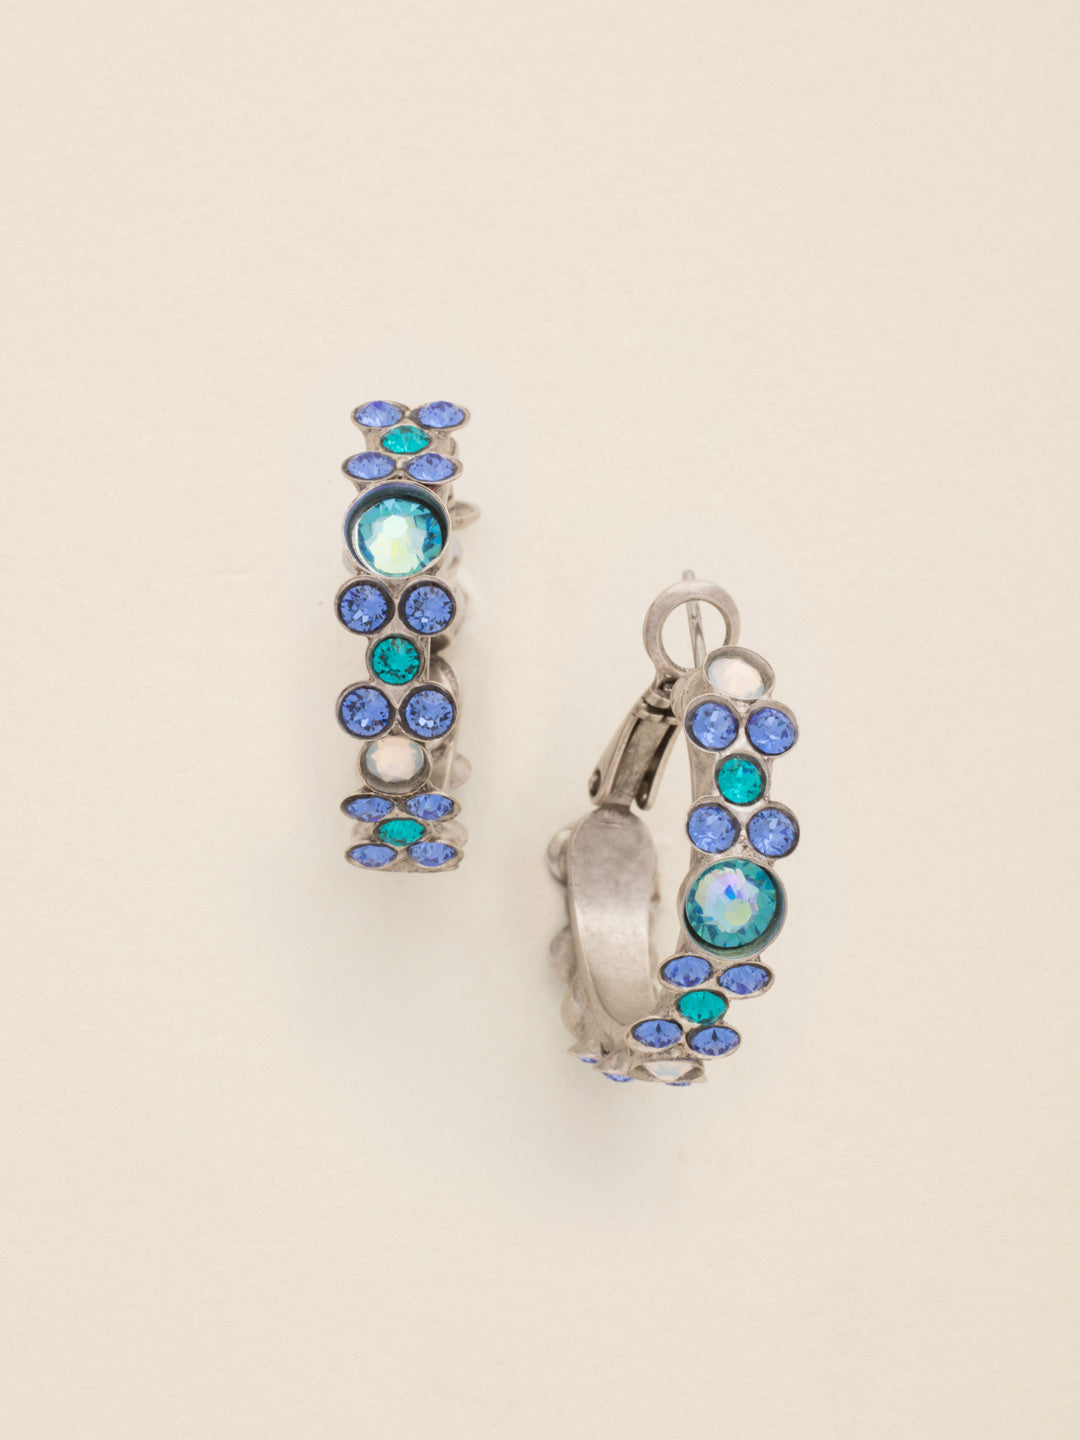 Floral Hoop Earrings - EBP15ASEB - <p>Intricate design, infused with gorgeous shine. A motif of floral clusters is featured here on a small, delicate hoop with a hinged post backing. From Sorrelli's Electric Blue collection in our Antique Silver-tone finish.</p>